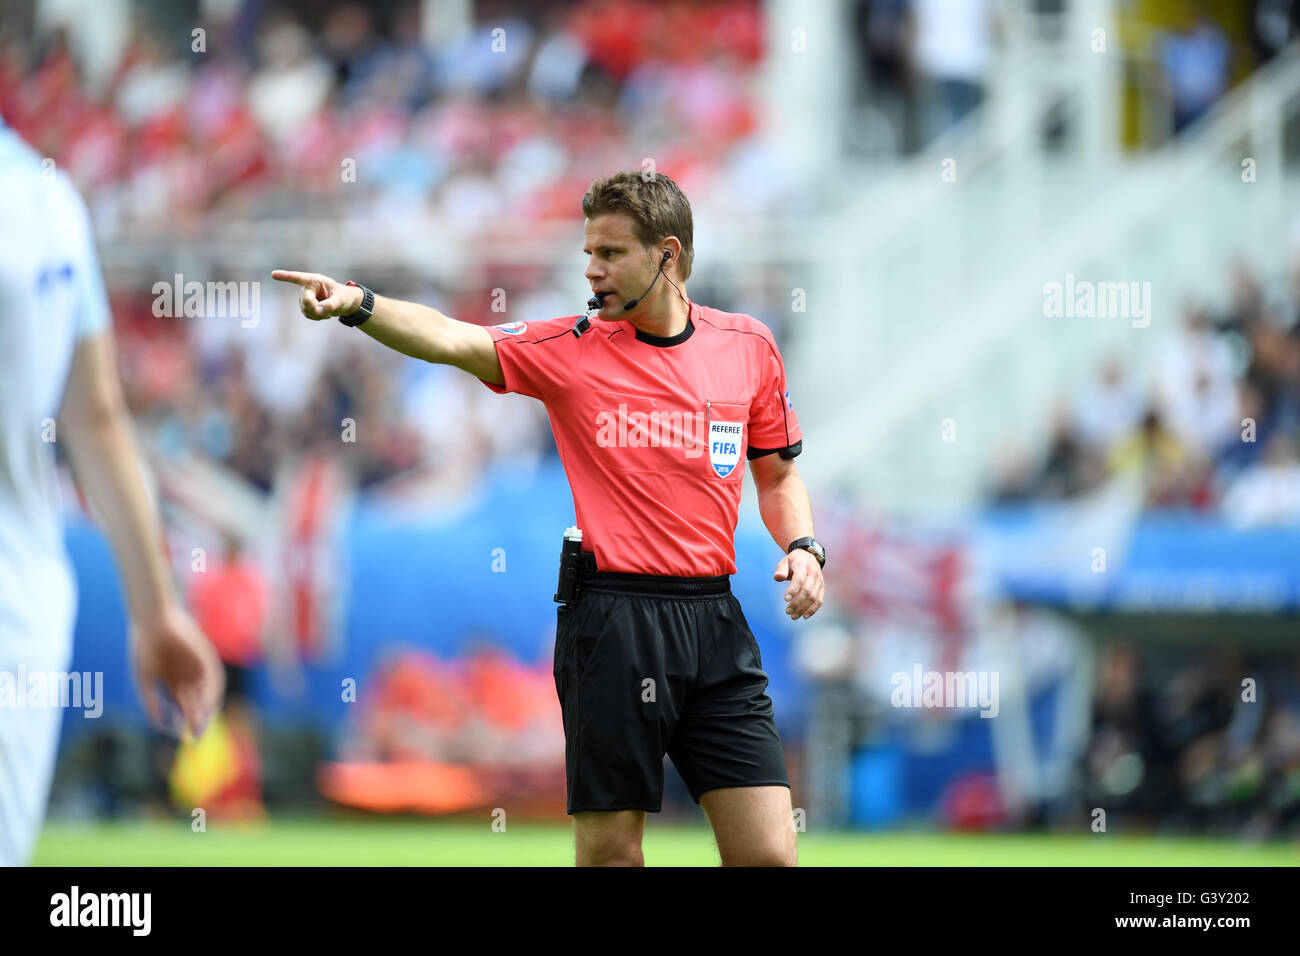 Lens, France. 16th June, 2016. Referee Felix Brych of Germany gestures during the Euro 2016 Group B soccer match between England and Wales at the Stade Bollaert-Delelis stadium, Lens, France, June 16, 2016. Photo: Marius Becker/dpa/Alamy Live News Stock Photo